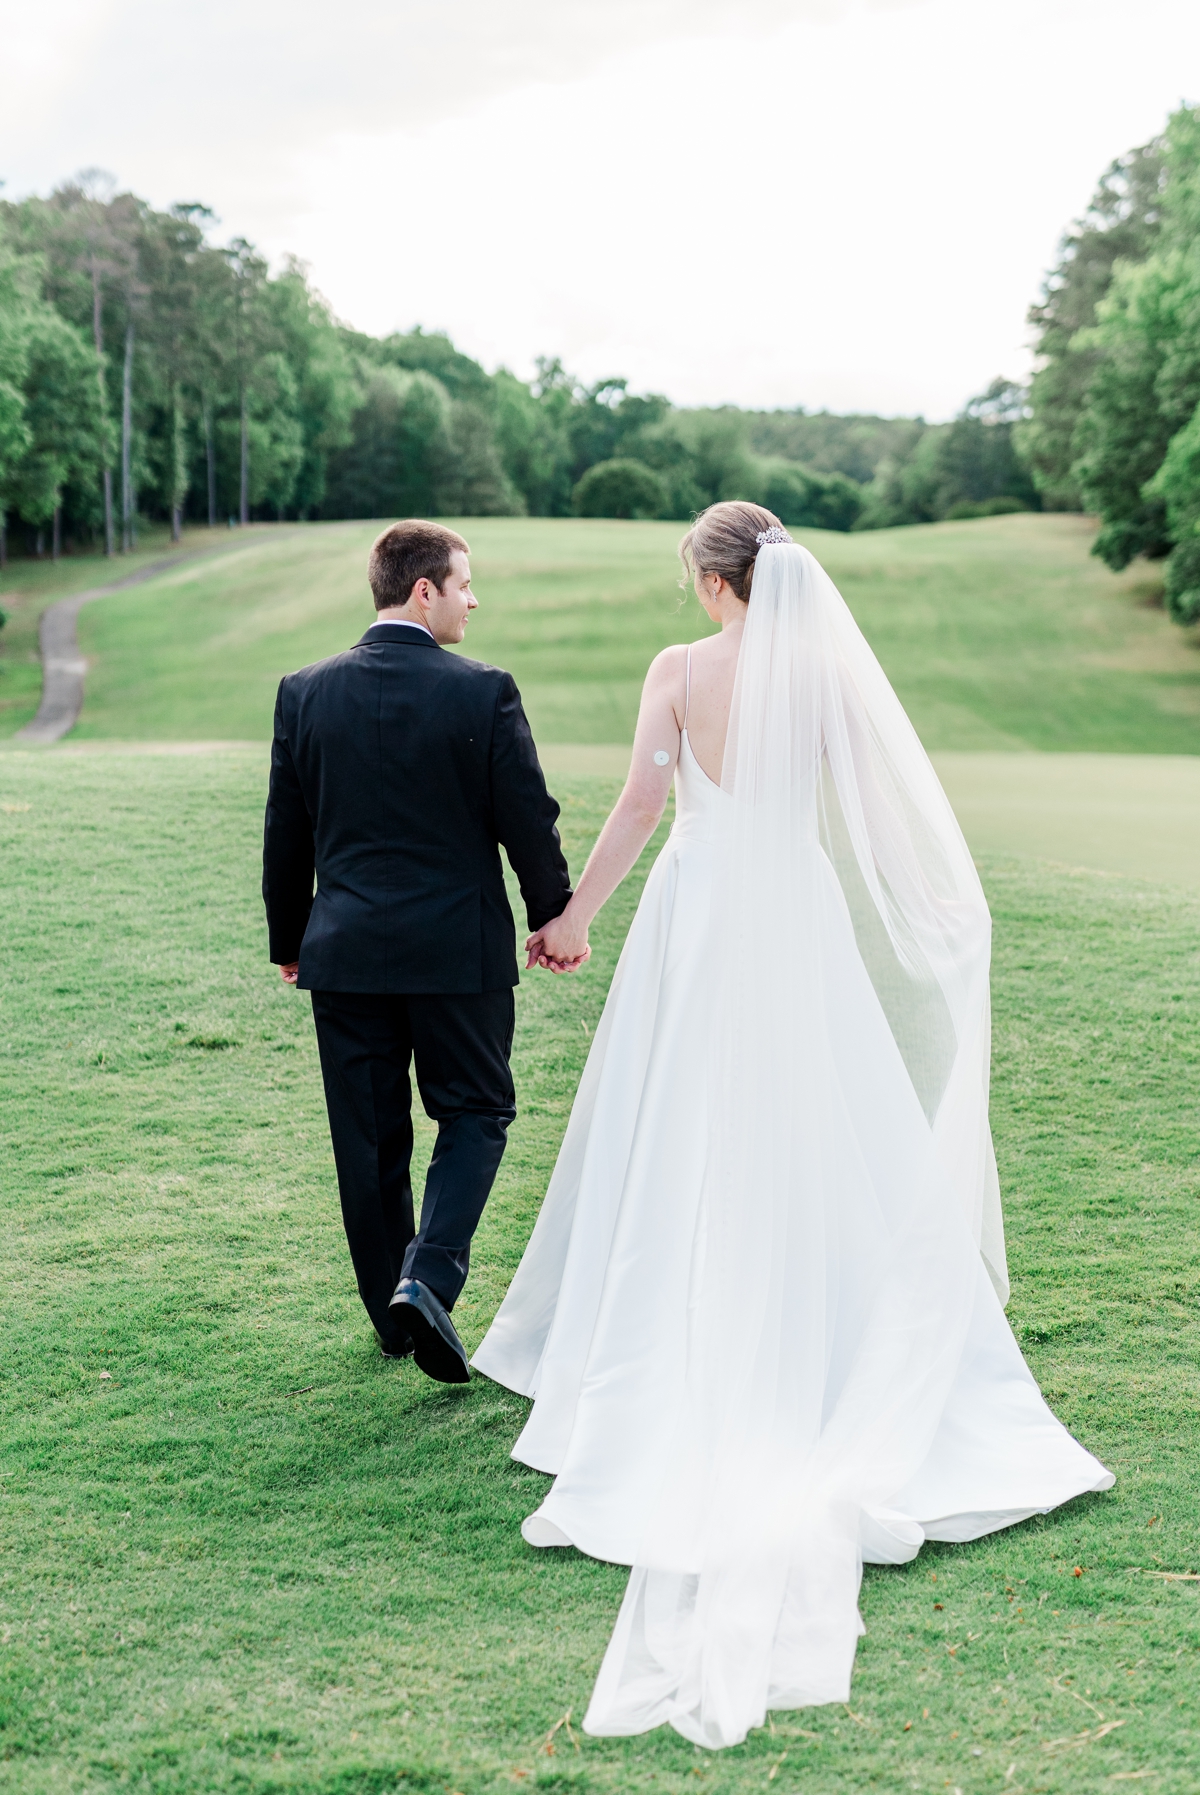 The bride and groom walking hand in hand off across the golf course during their wedding in Raleigh, NC.